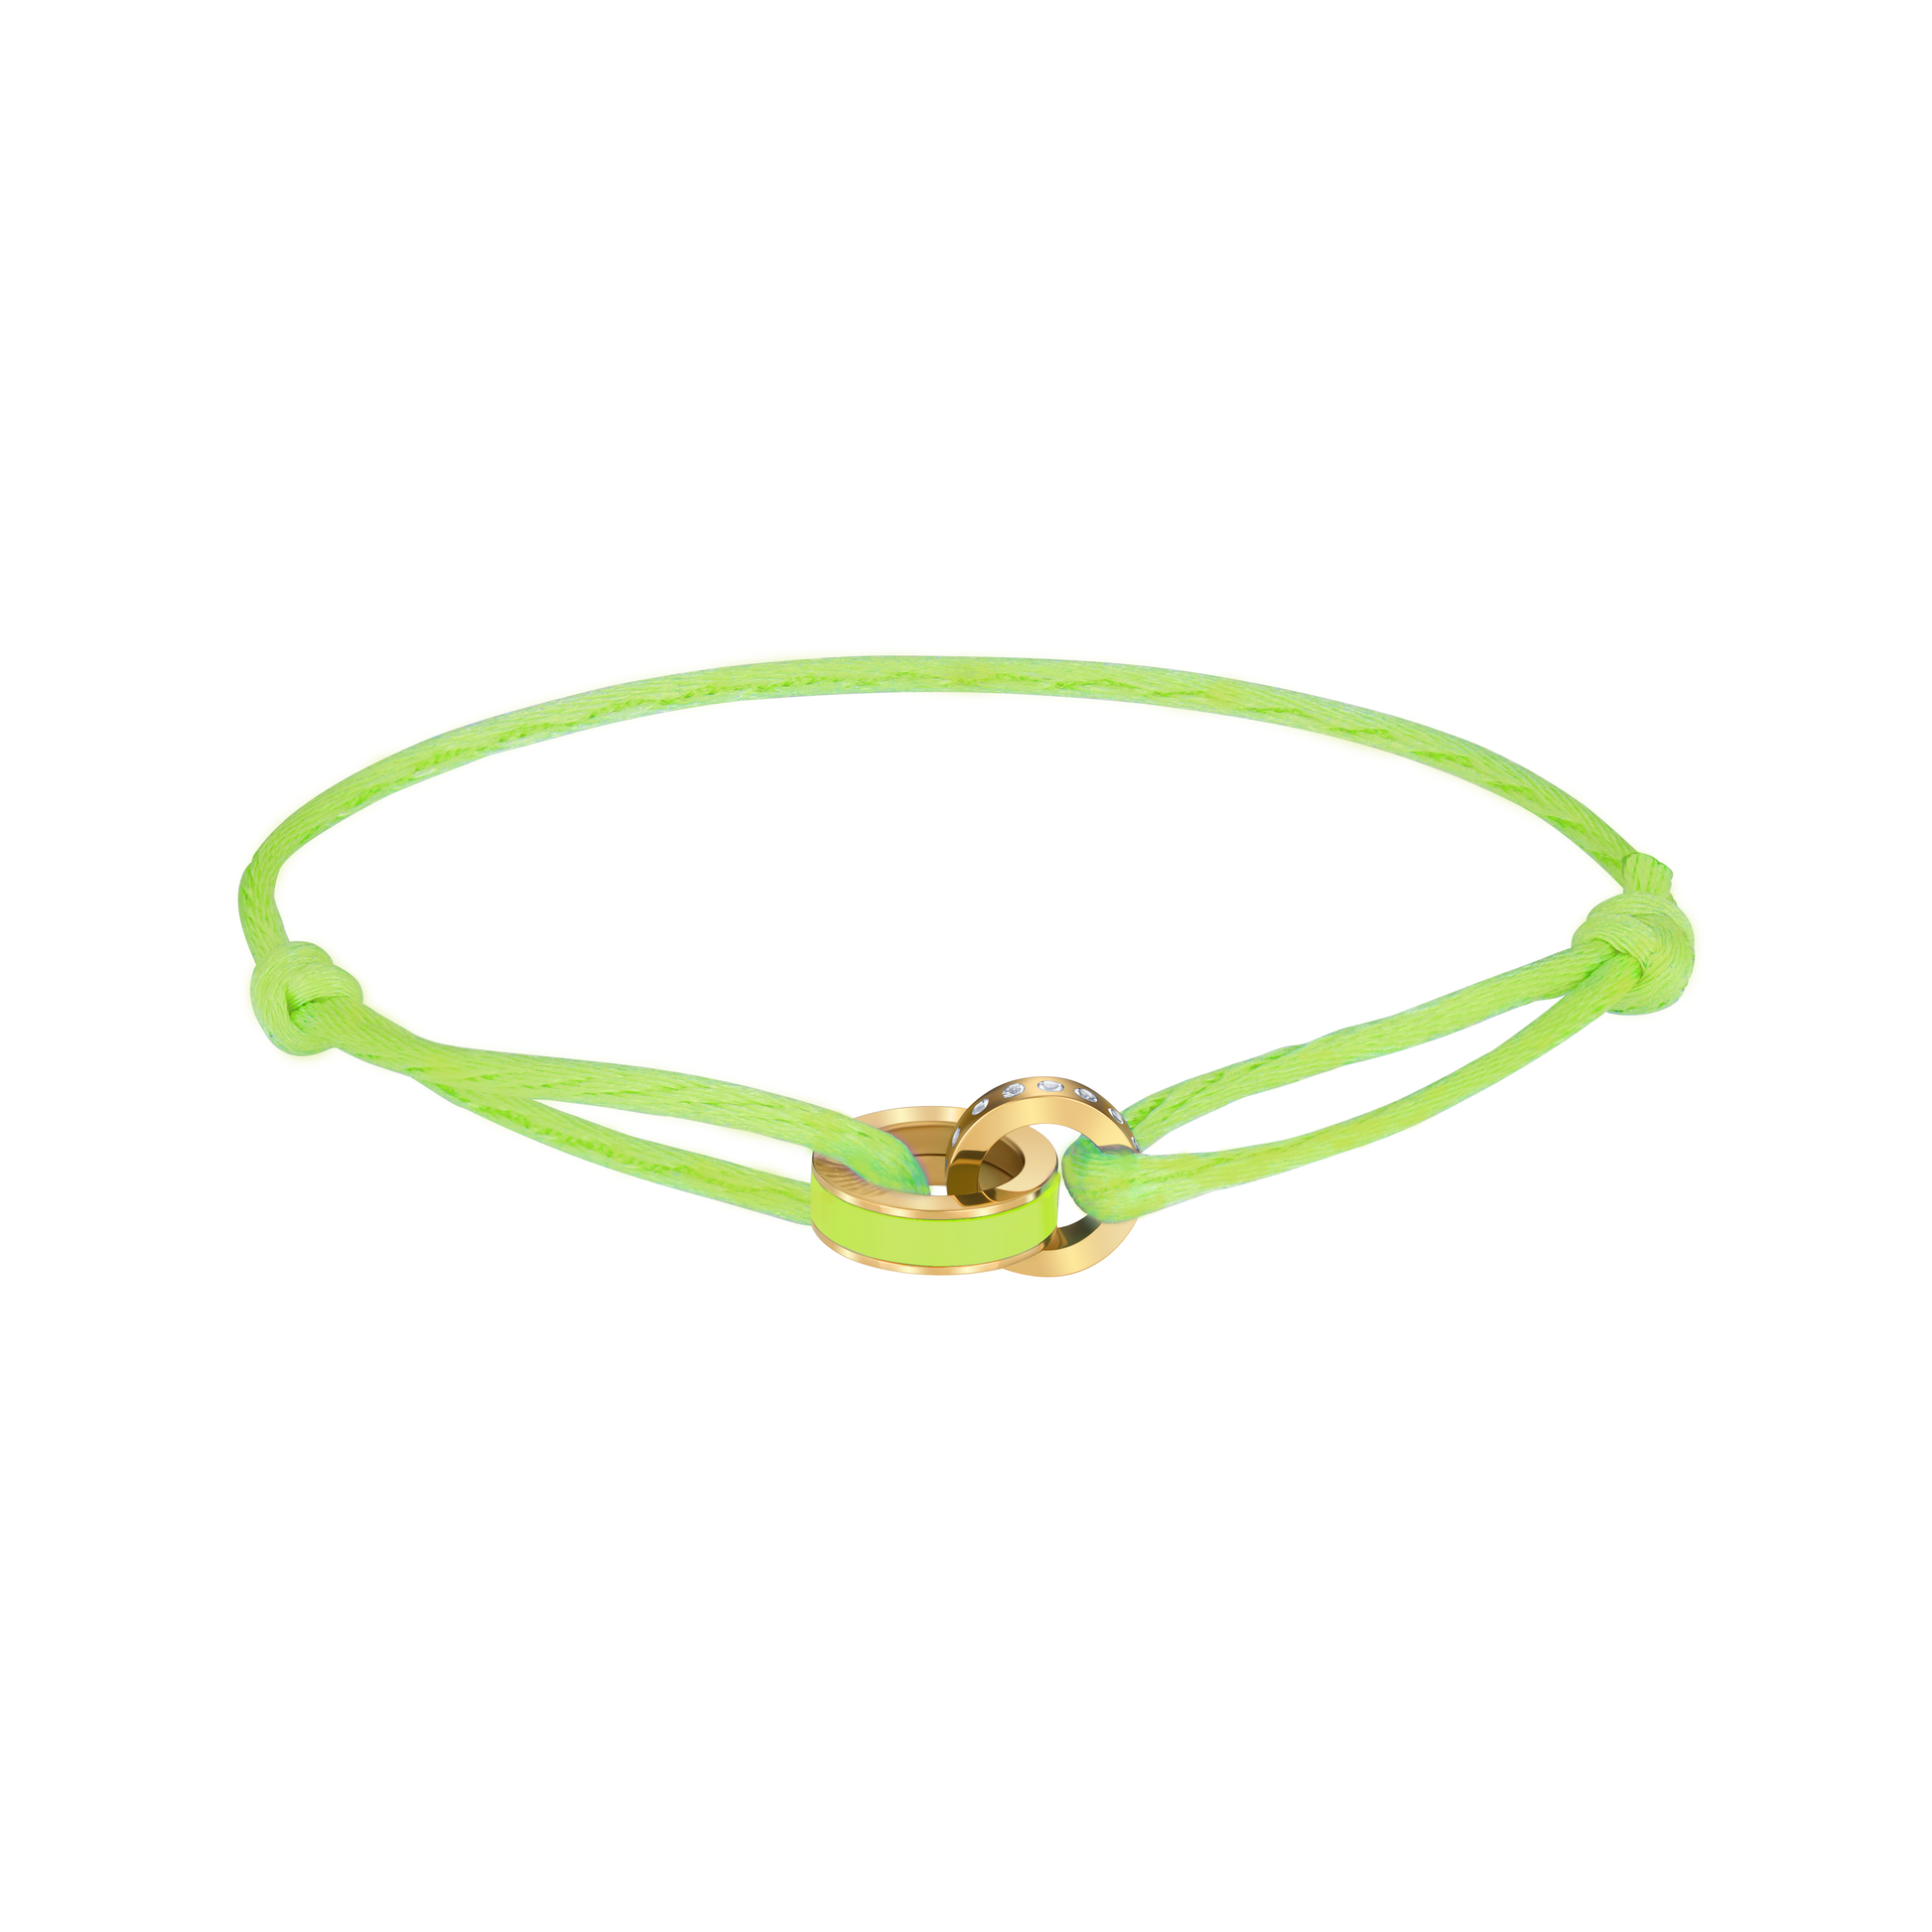 WEWA LIME GREEN CORD LIME GREEN WITH ZIRCONIA CHIP BRACELET